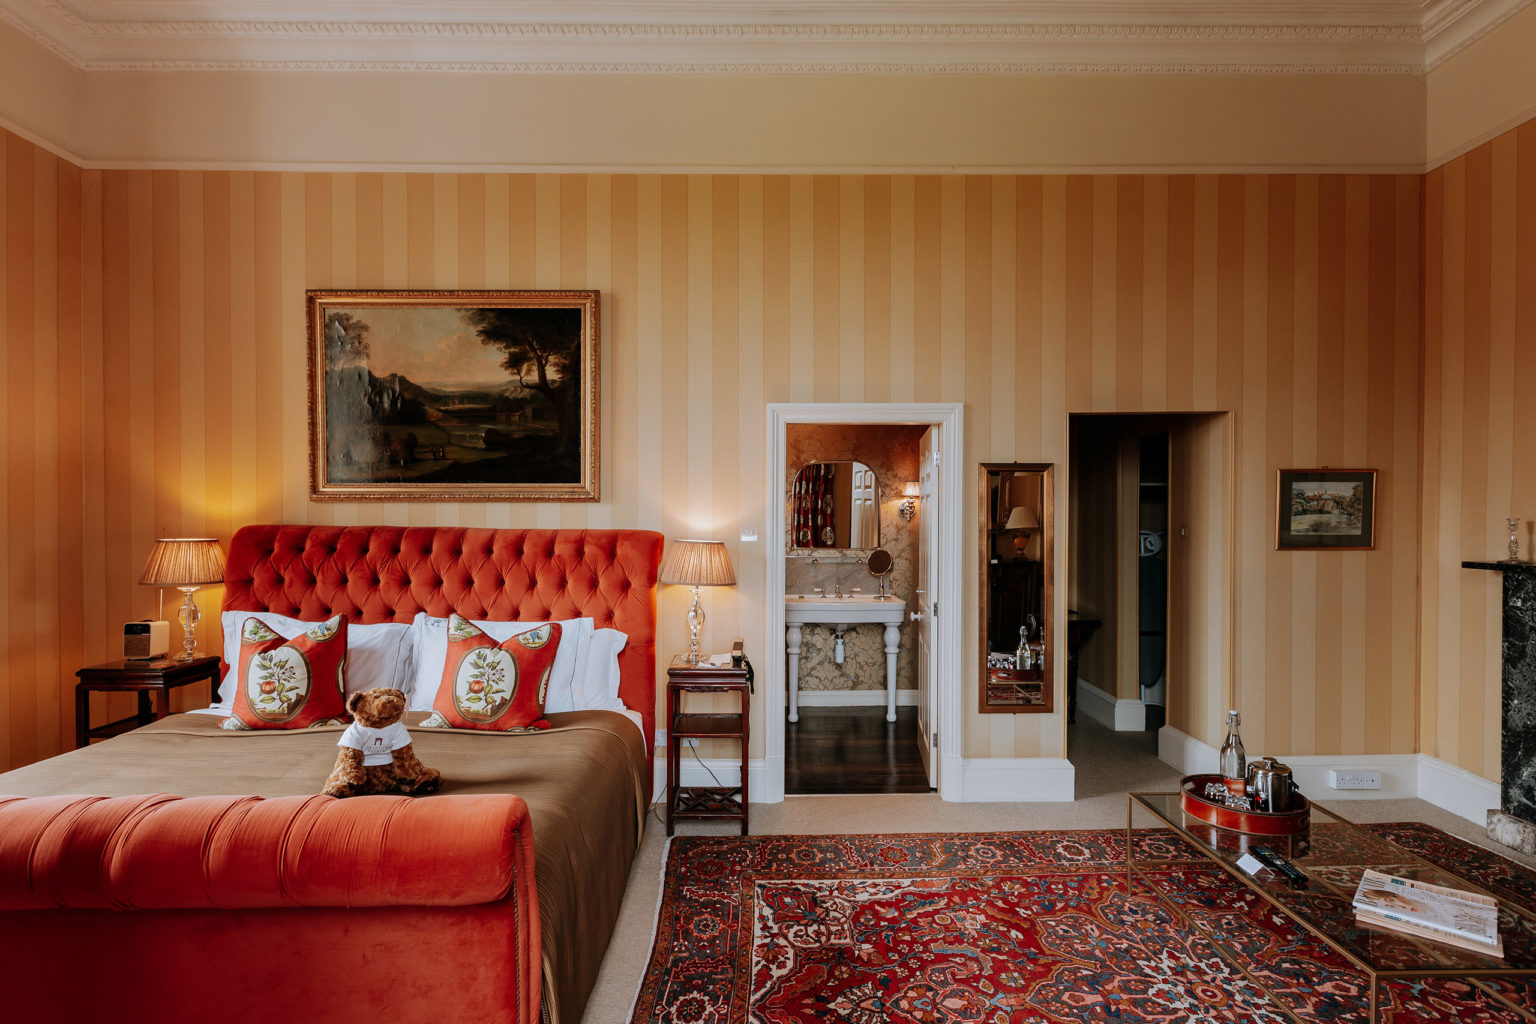 A photograph of a Harrogate Duke Bedroom at Swinton Park hotel in North Yorkshire